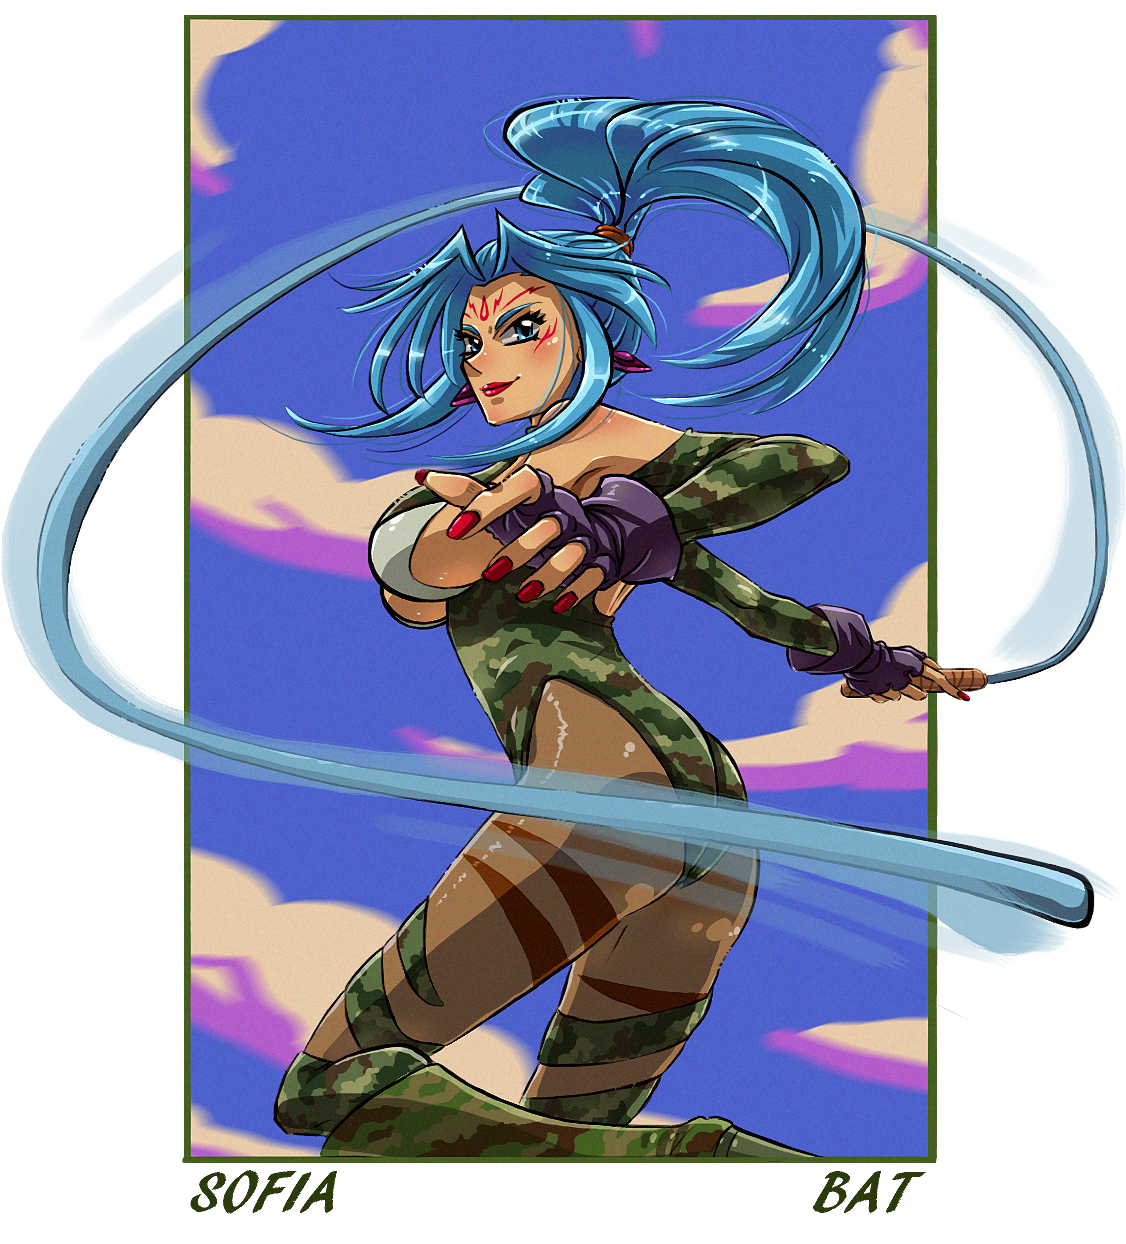 Sofia from Battle Arena Toshinden in the GA-HQ Video Game Character DB.